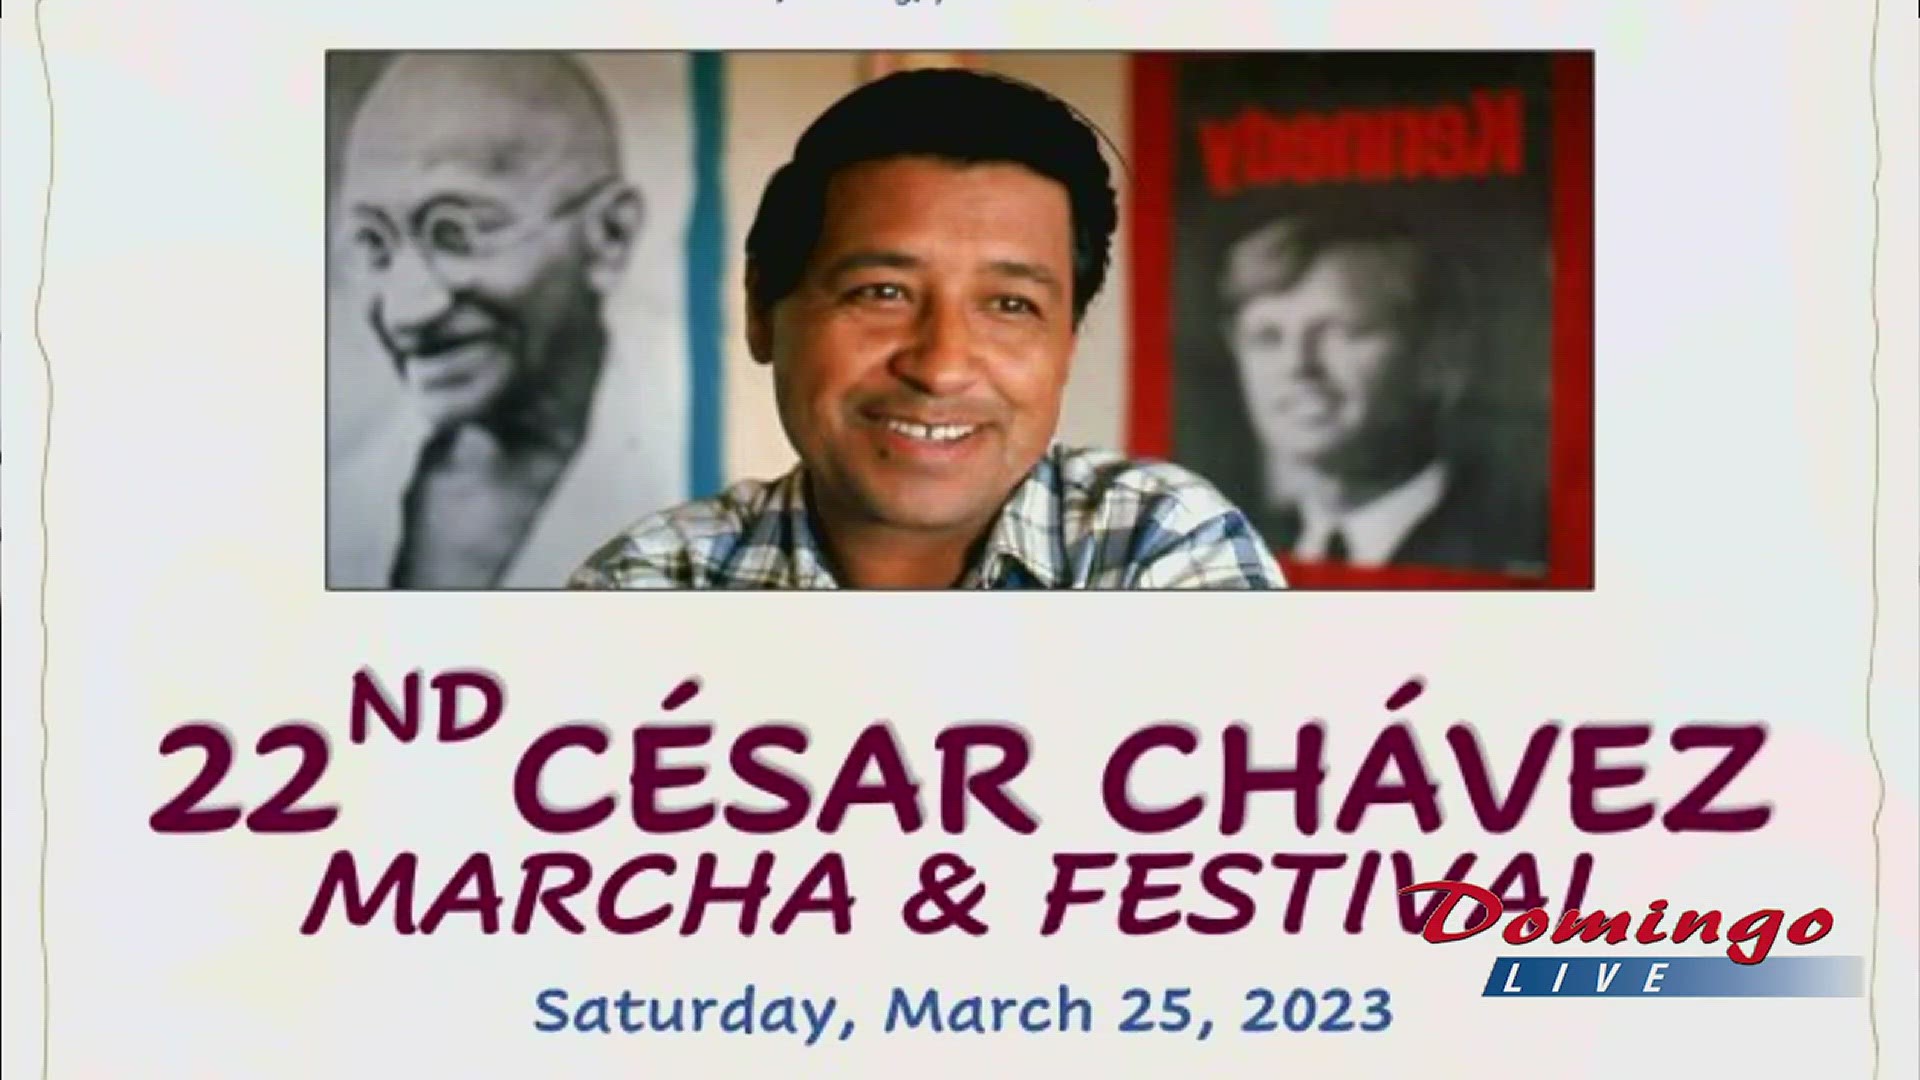 Dr. Nancy Vera joined us live to explain the importance of Cesar Chavez's legacy and tell us what to expect at this year's Cesar Chavez Marcha & Festival on Mar. 25.